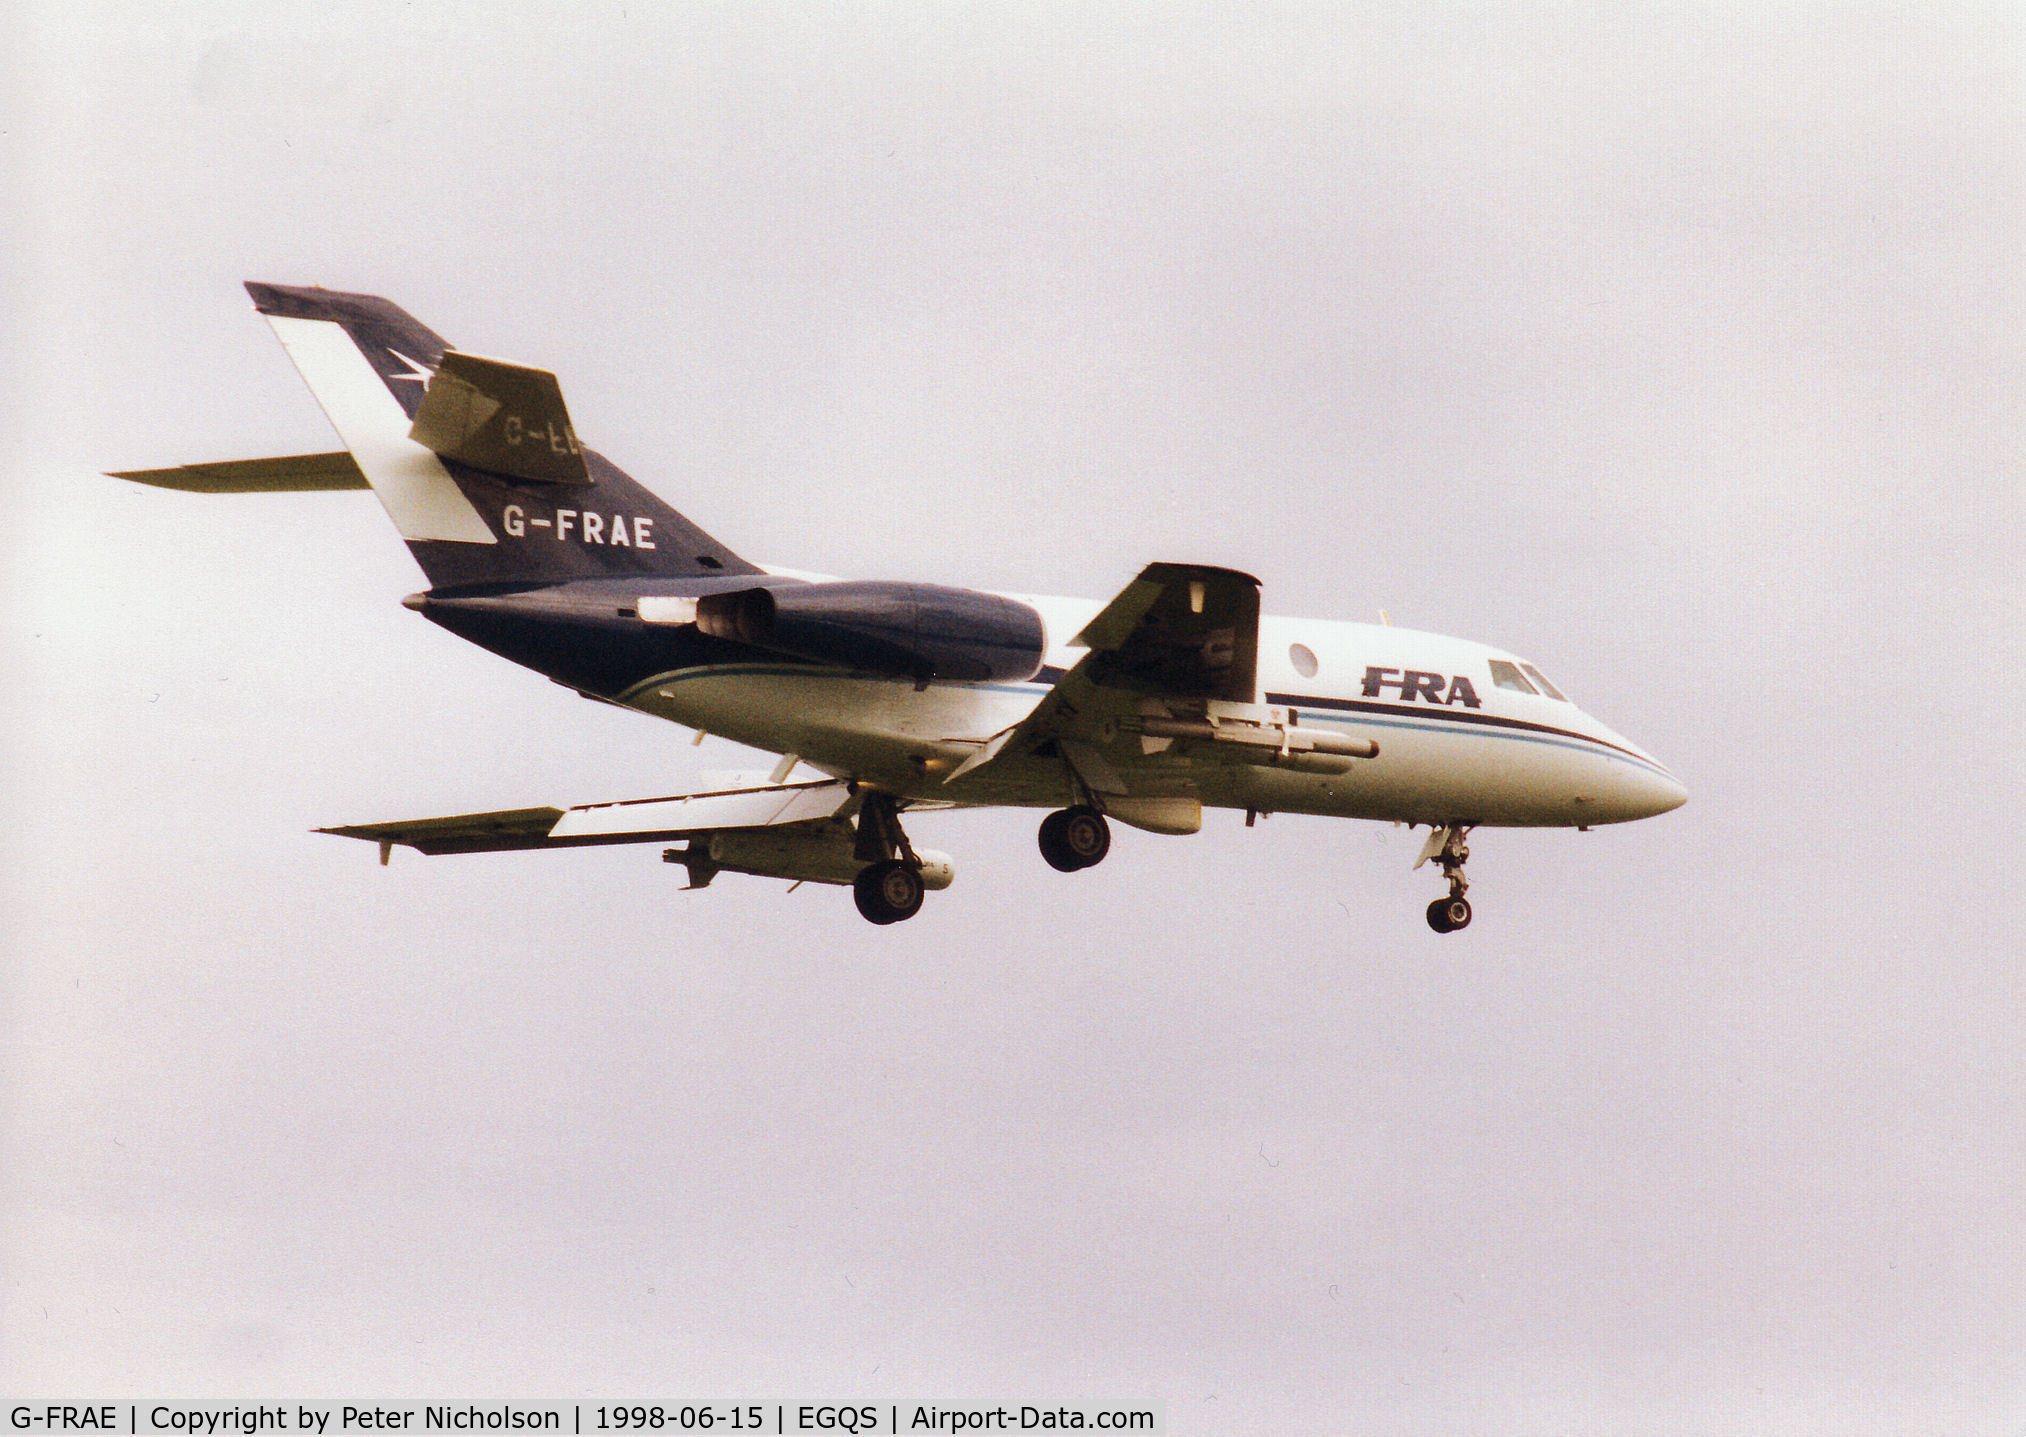 G-FRAE, 1973 Dassault Falcon (Mystere) 20E C/N 280, Falcon 20 of FRA arriving at RAF Lossiemouth for the 1998 Joint Maritime Course.